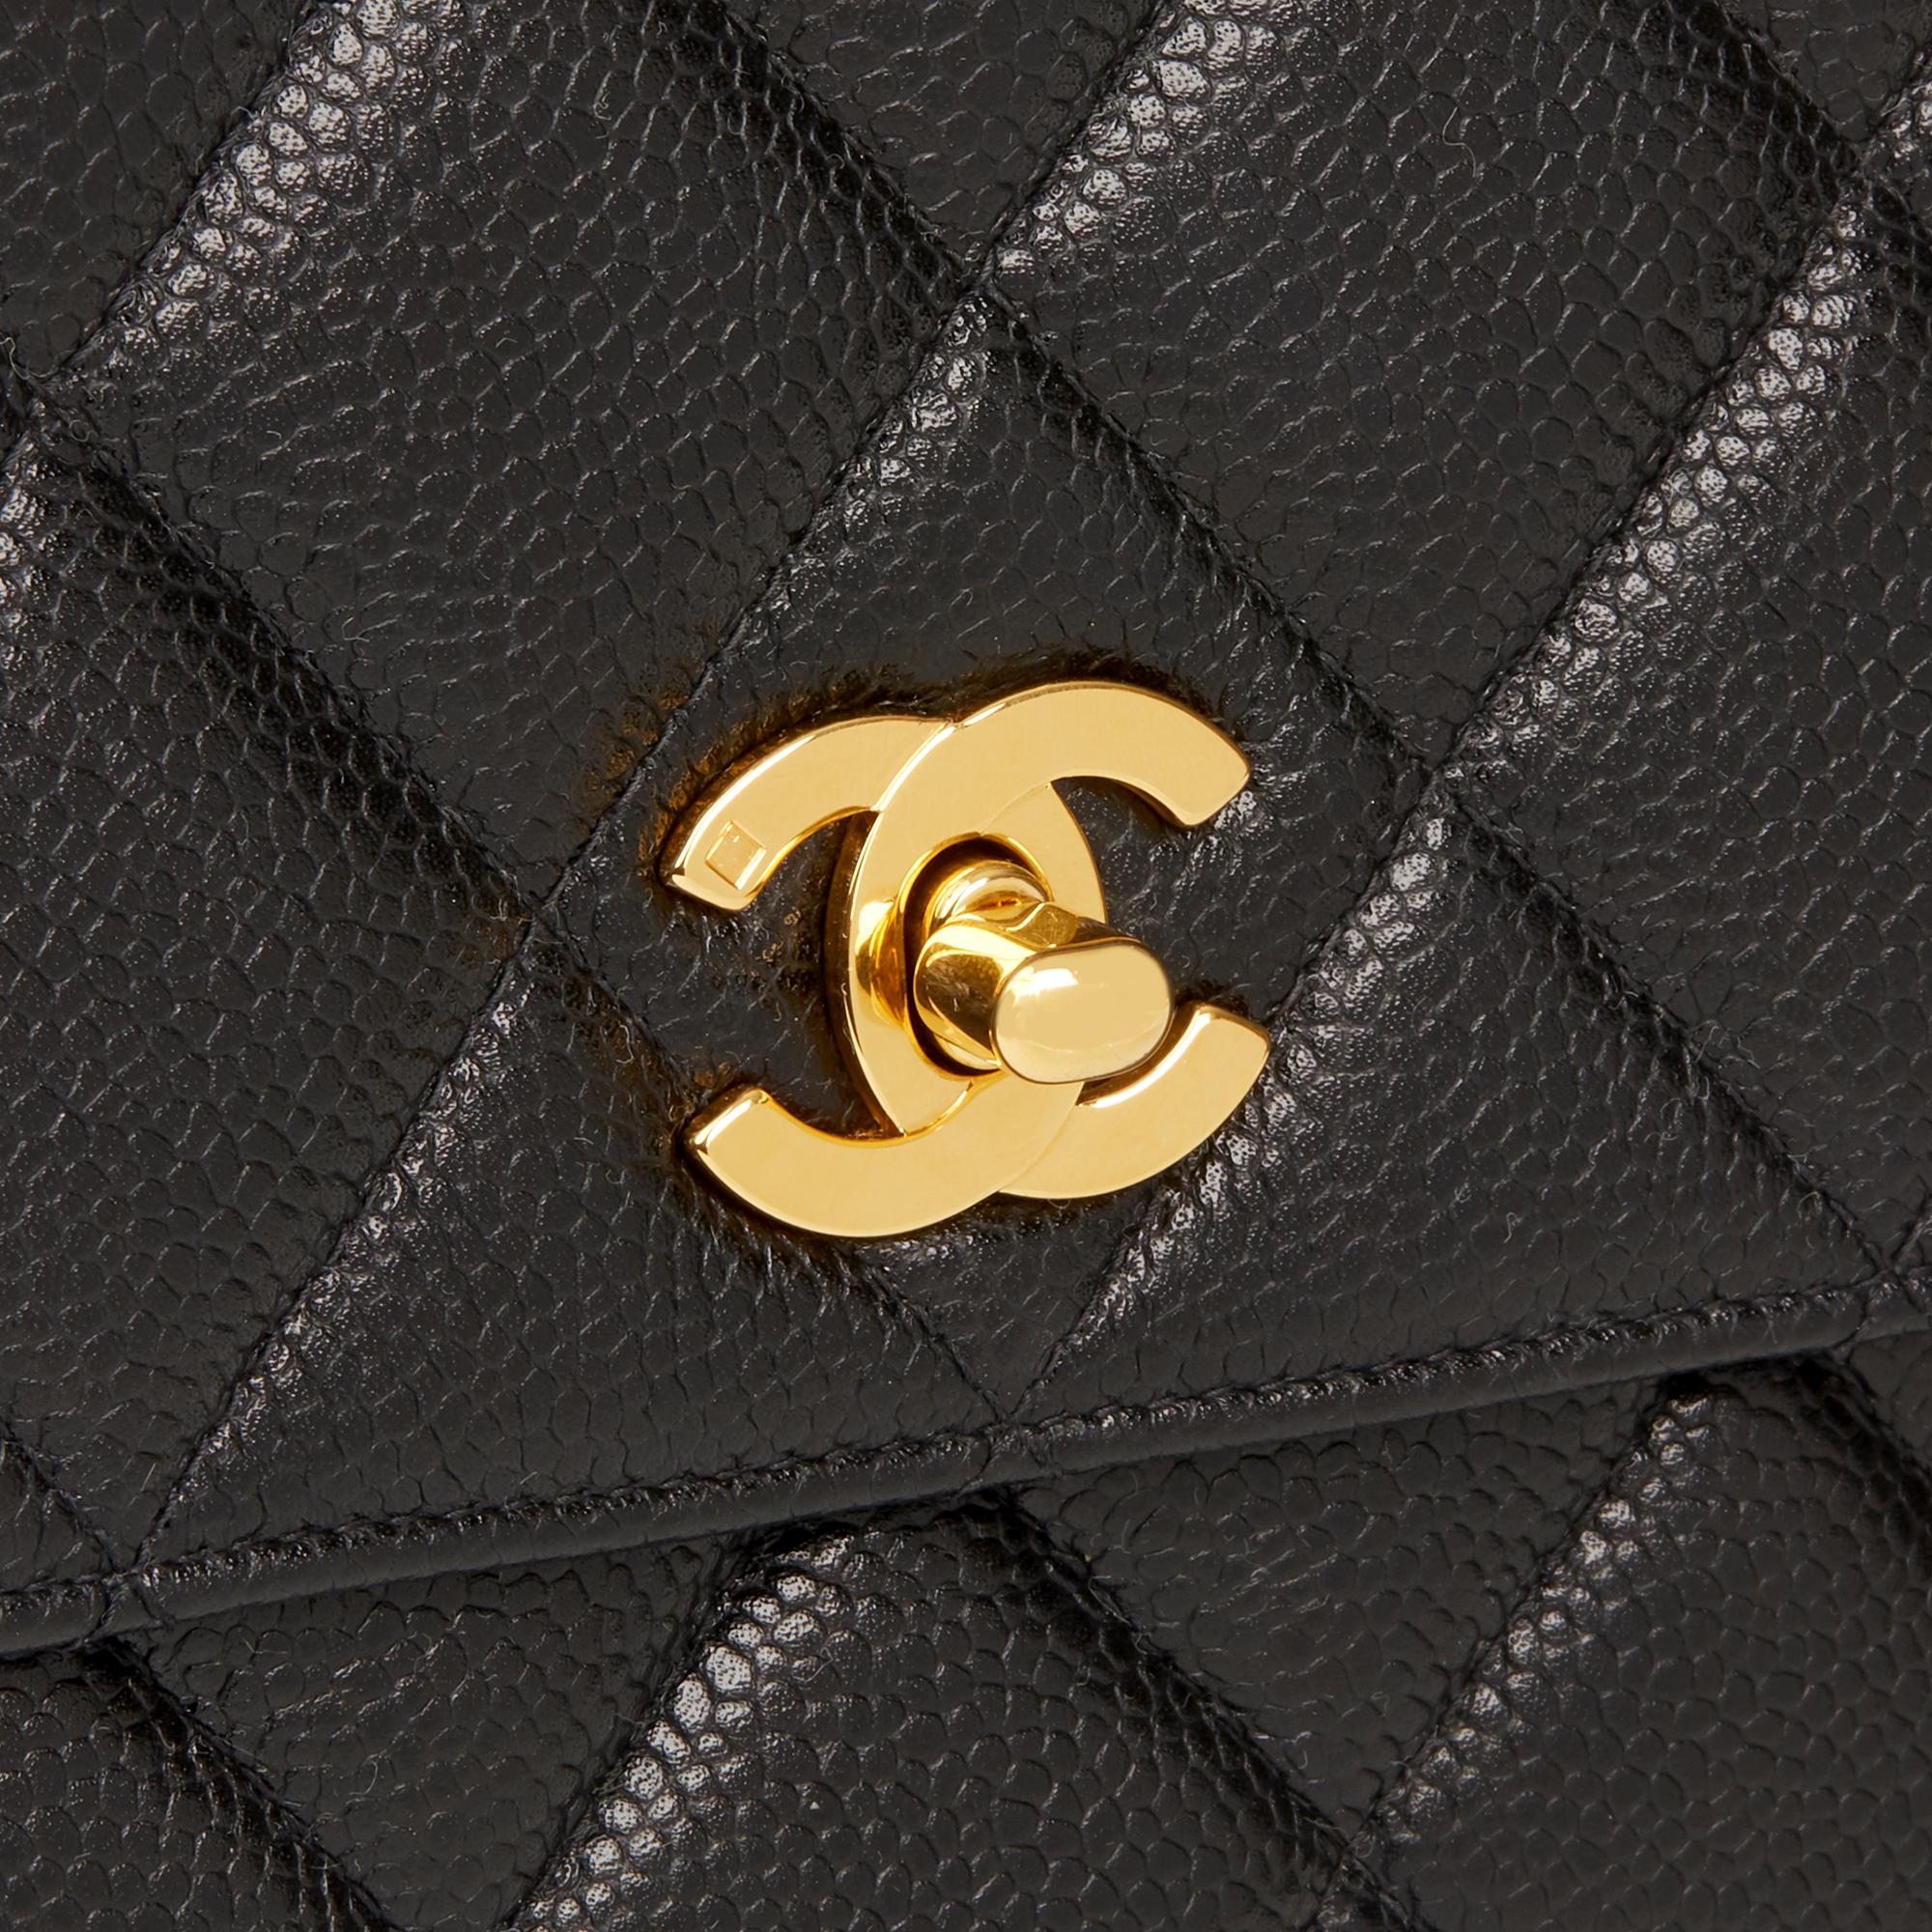 1995 Chanel Black Quilted Caviar Leather Vintage Classic Single Flap Bag 2